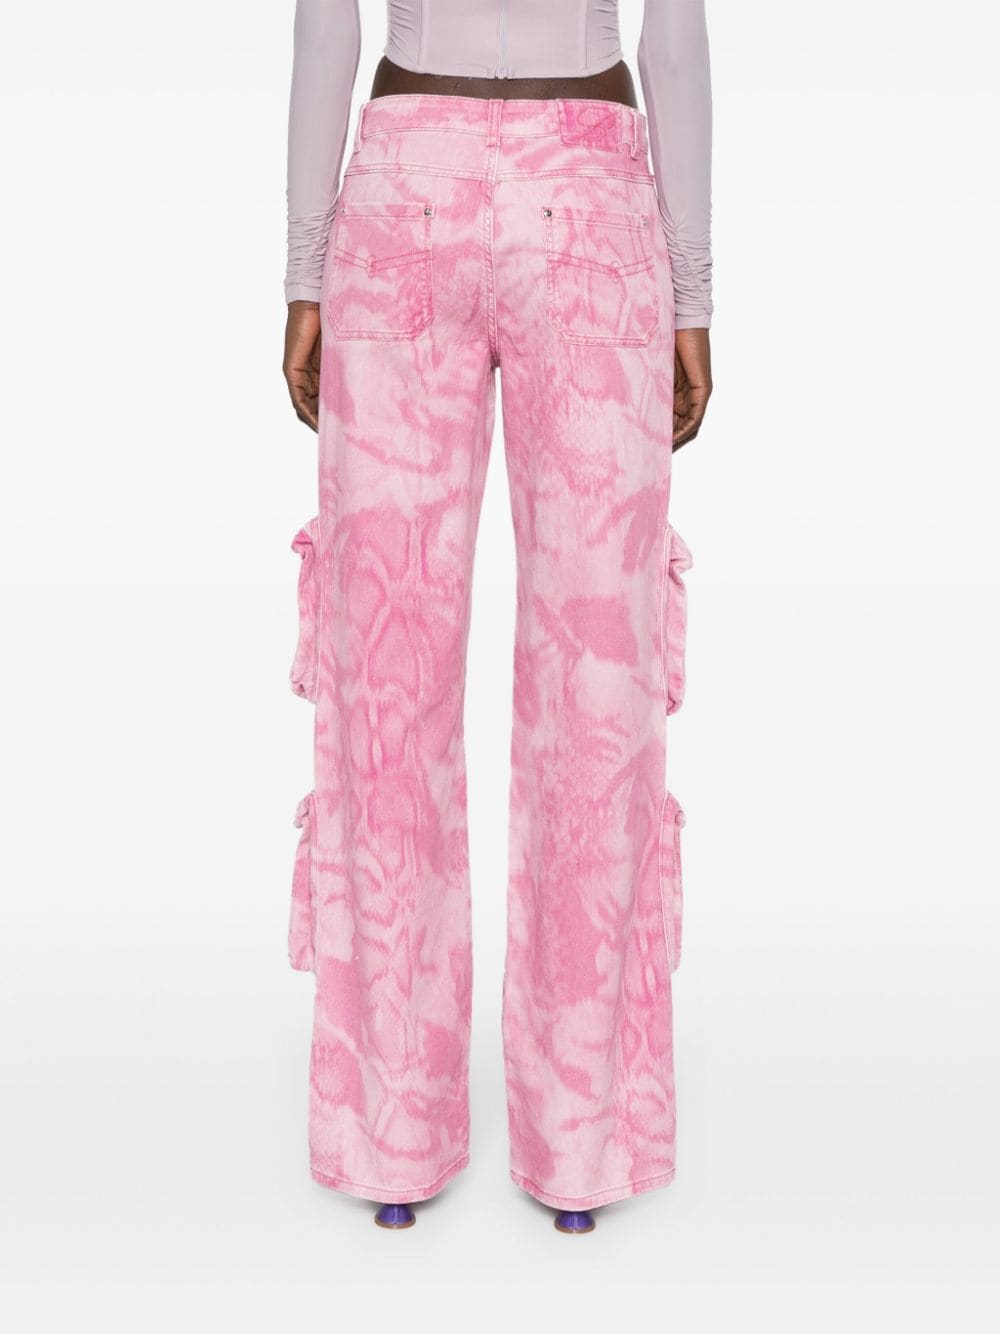 Camouflage print trousers